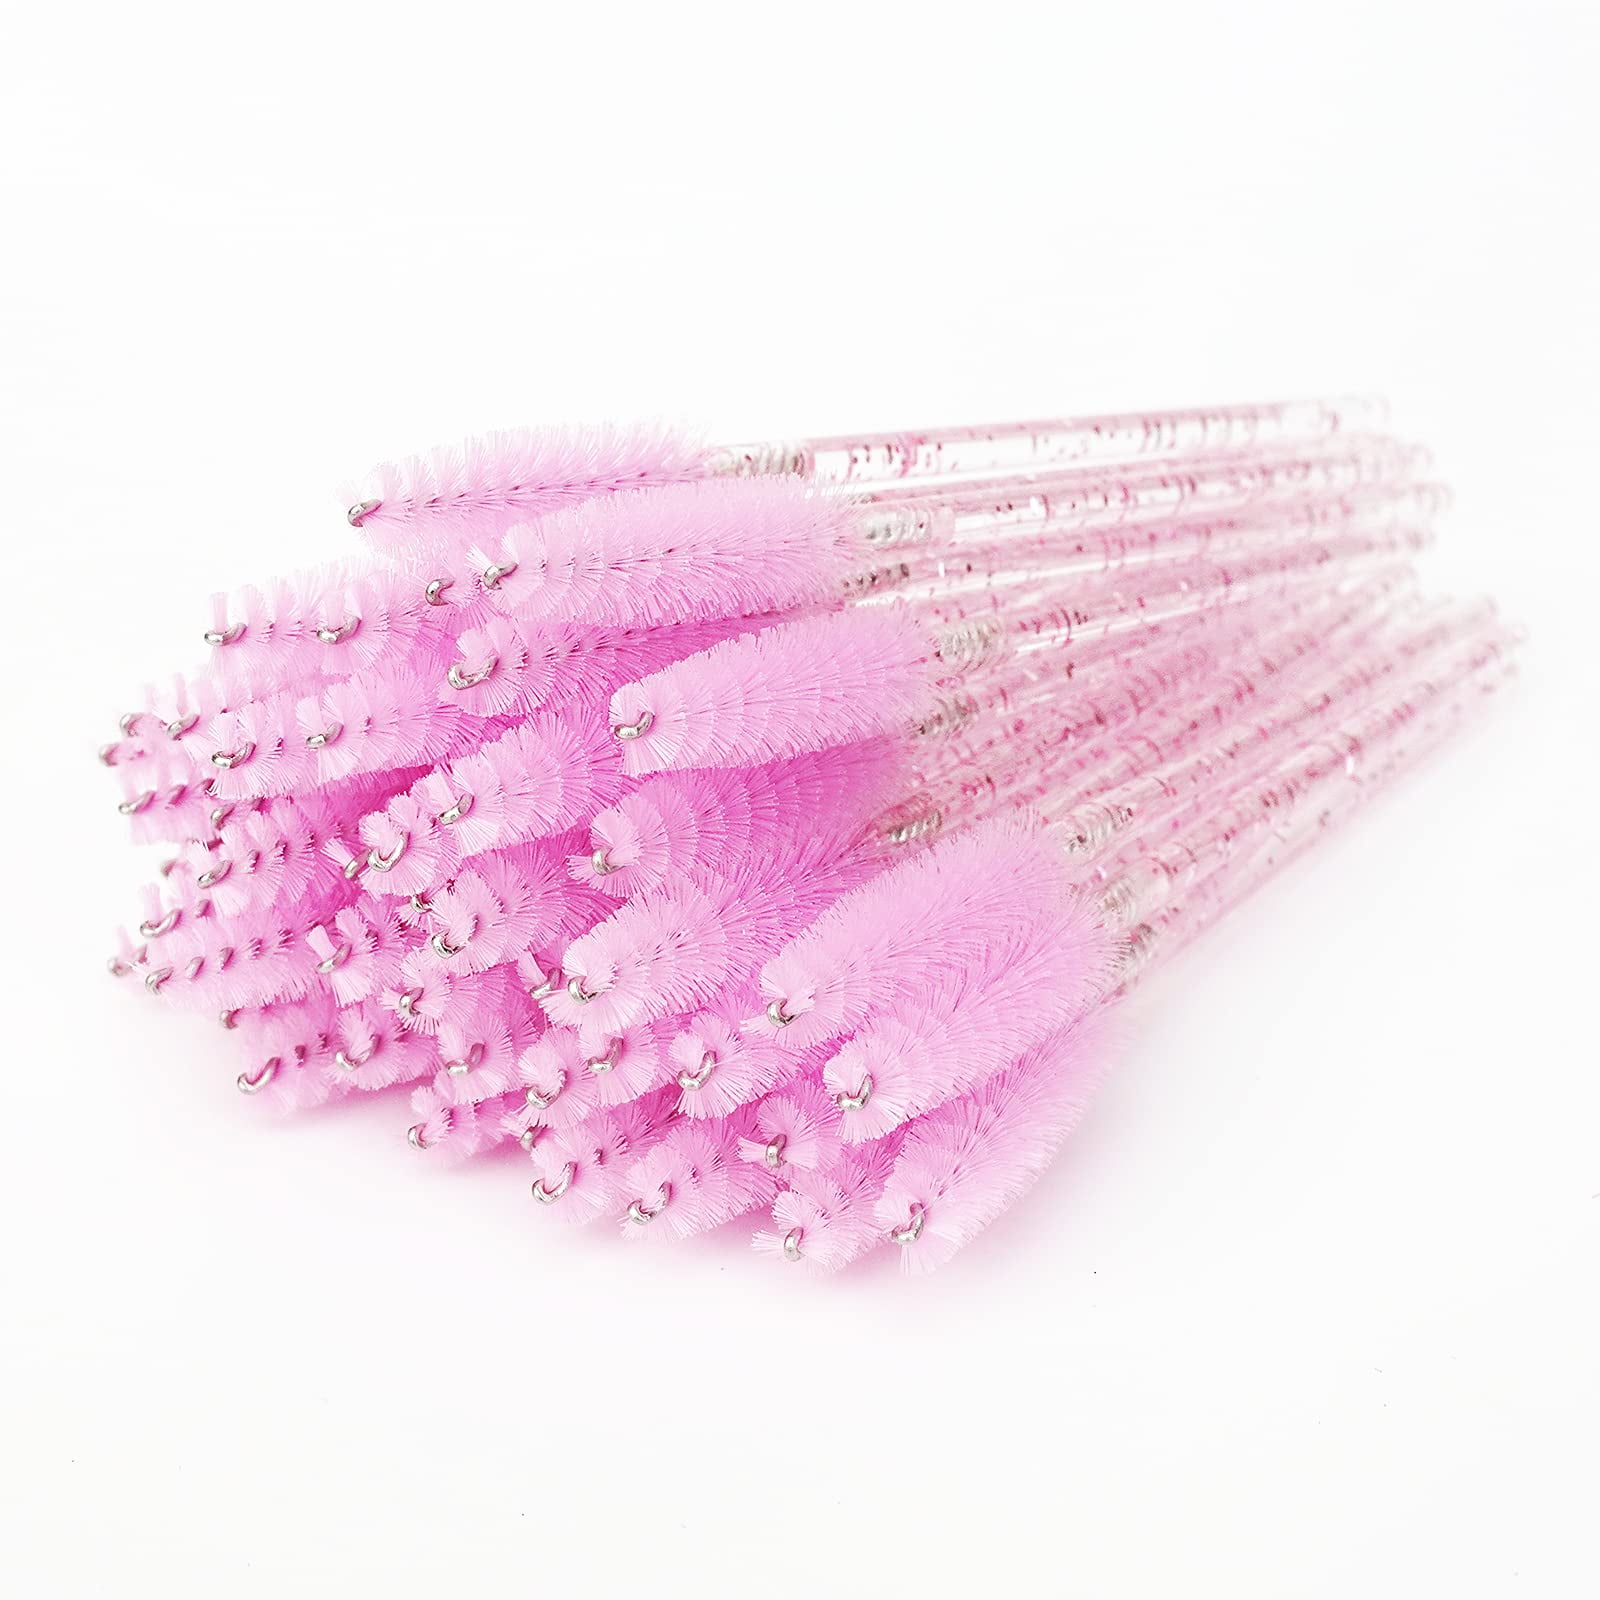 Premium Disposable Spoolie Micro Brush for Beauty and Nail Art (1000 Packs)  - HPNESS Pink Mascara Wands, Adhesive Glue Remover Brush, Cotton Applicator  Stick – TweezerCo